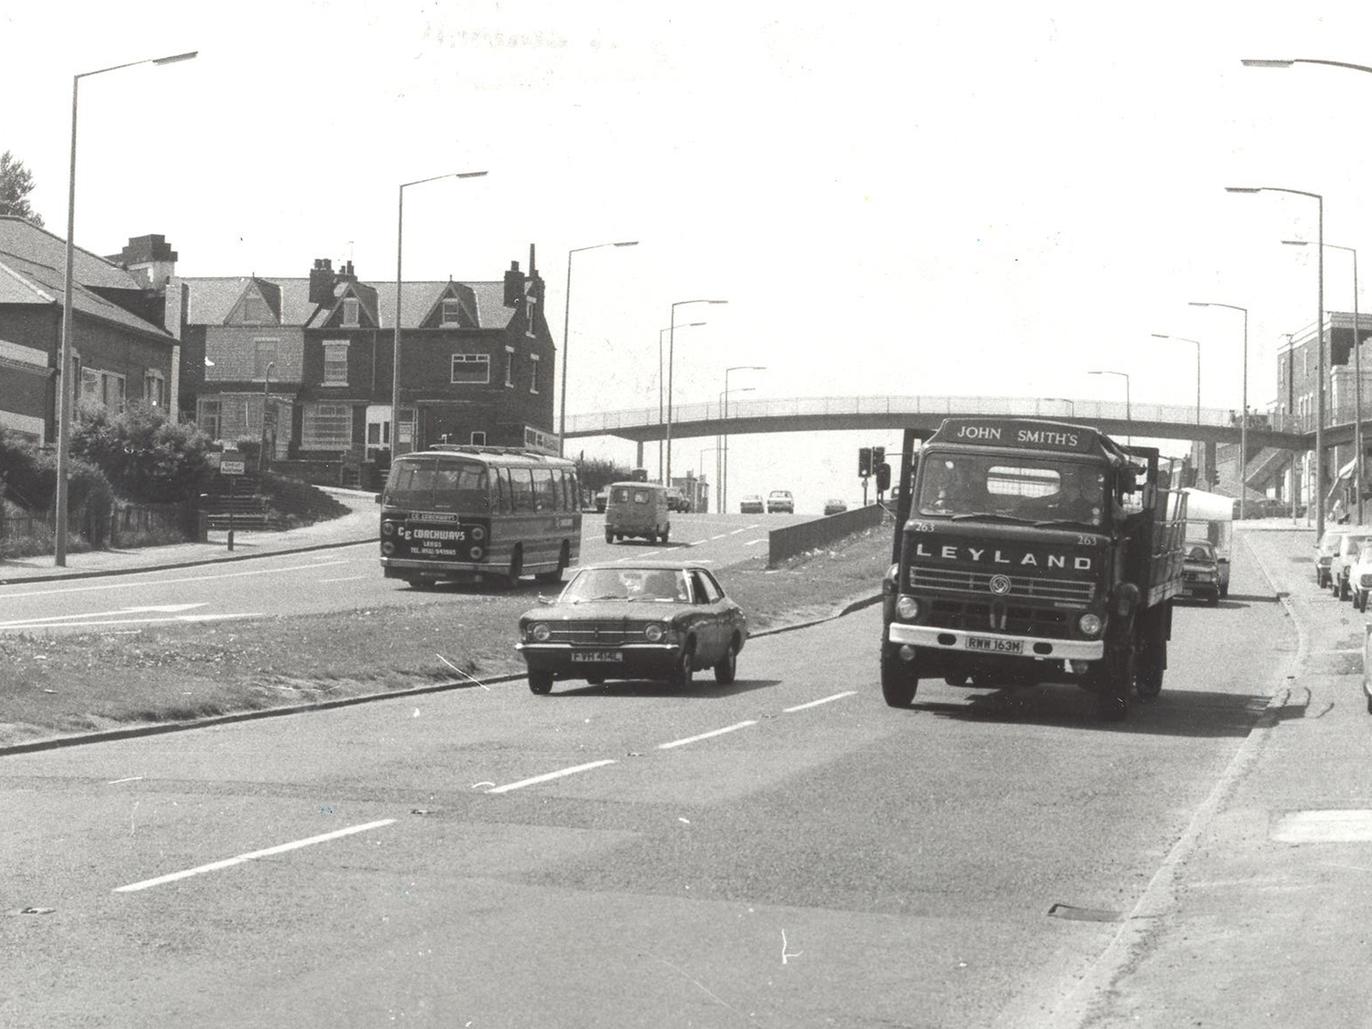 The caption says the 'busy' York Road going out of Leeds.